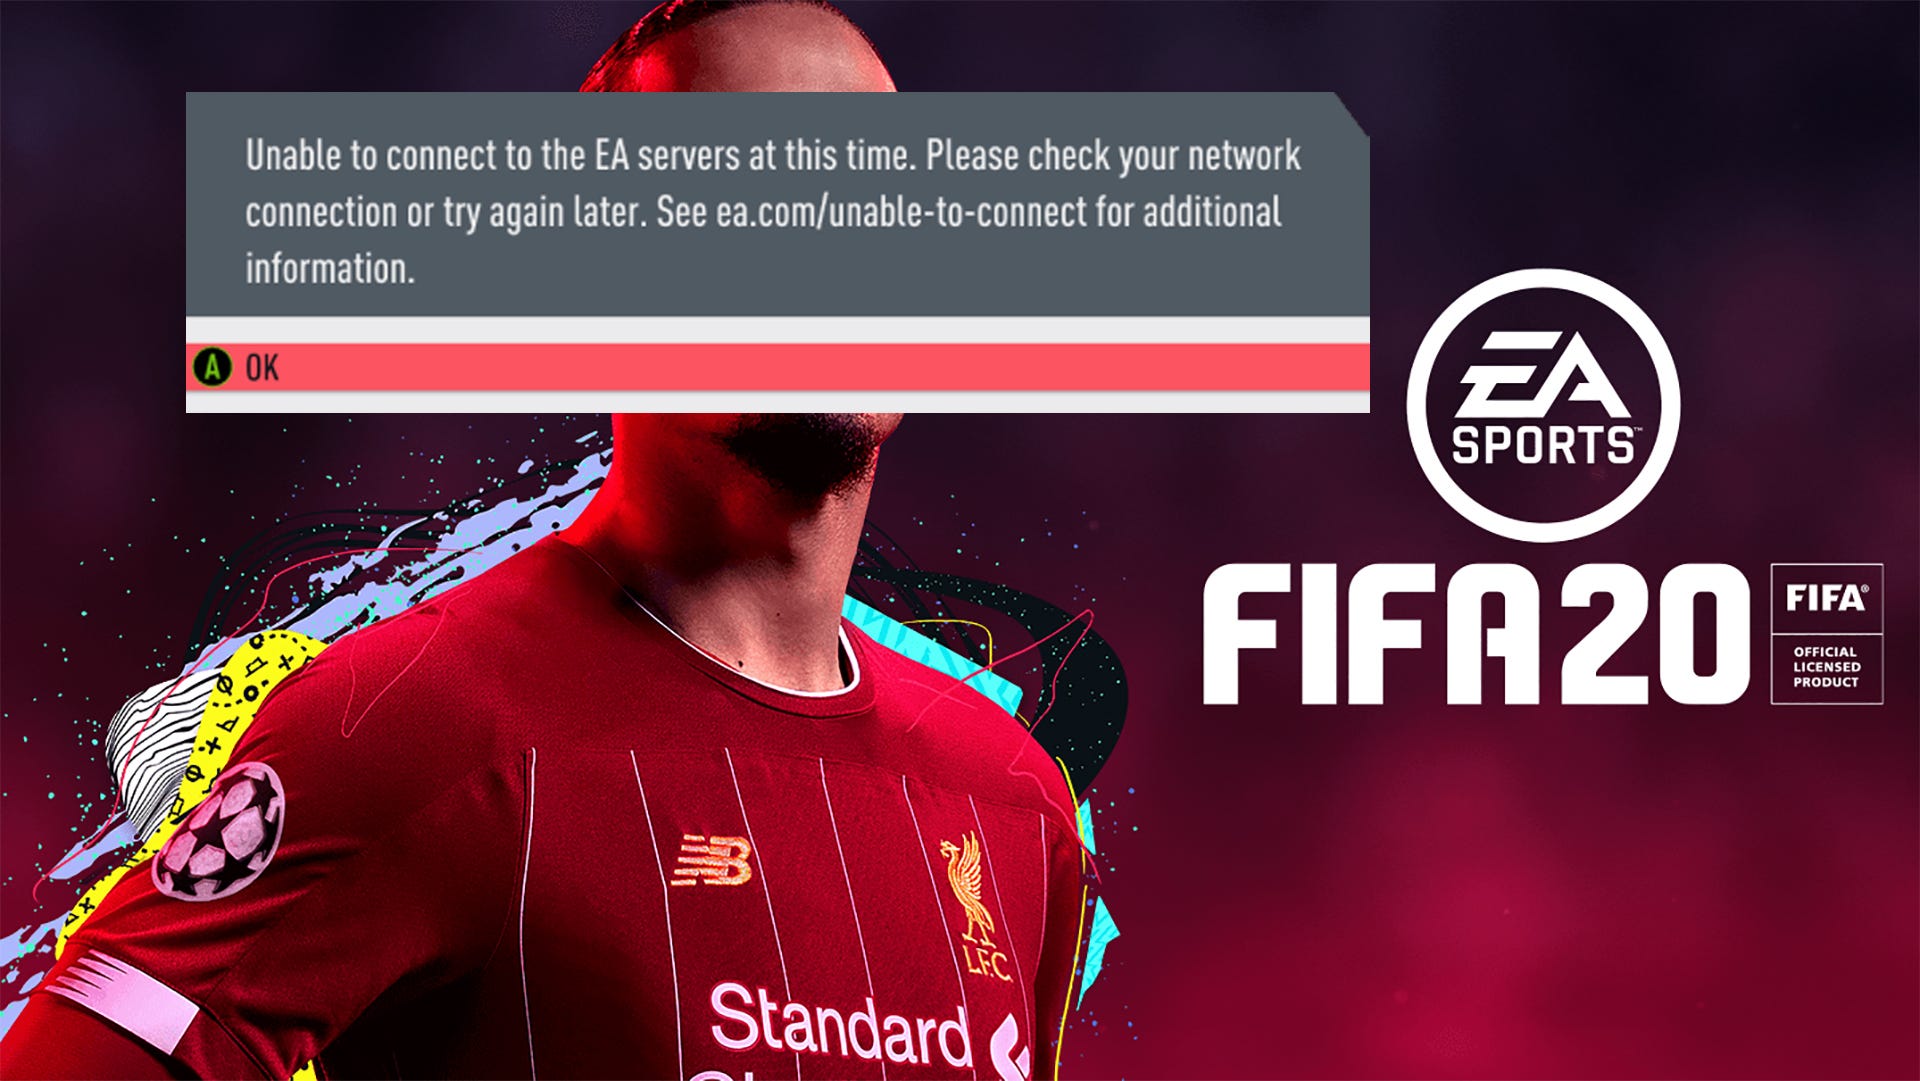 Серверы fifa. Connect FIFA. EA.com/unable-to-connect.